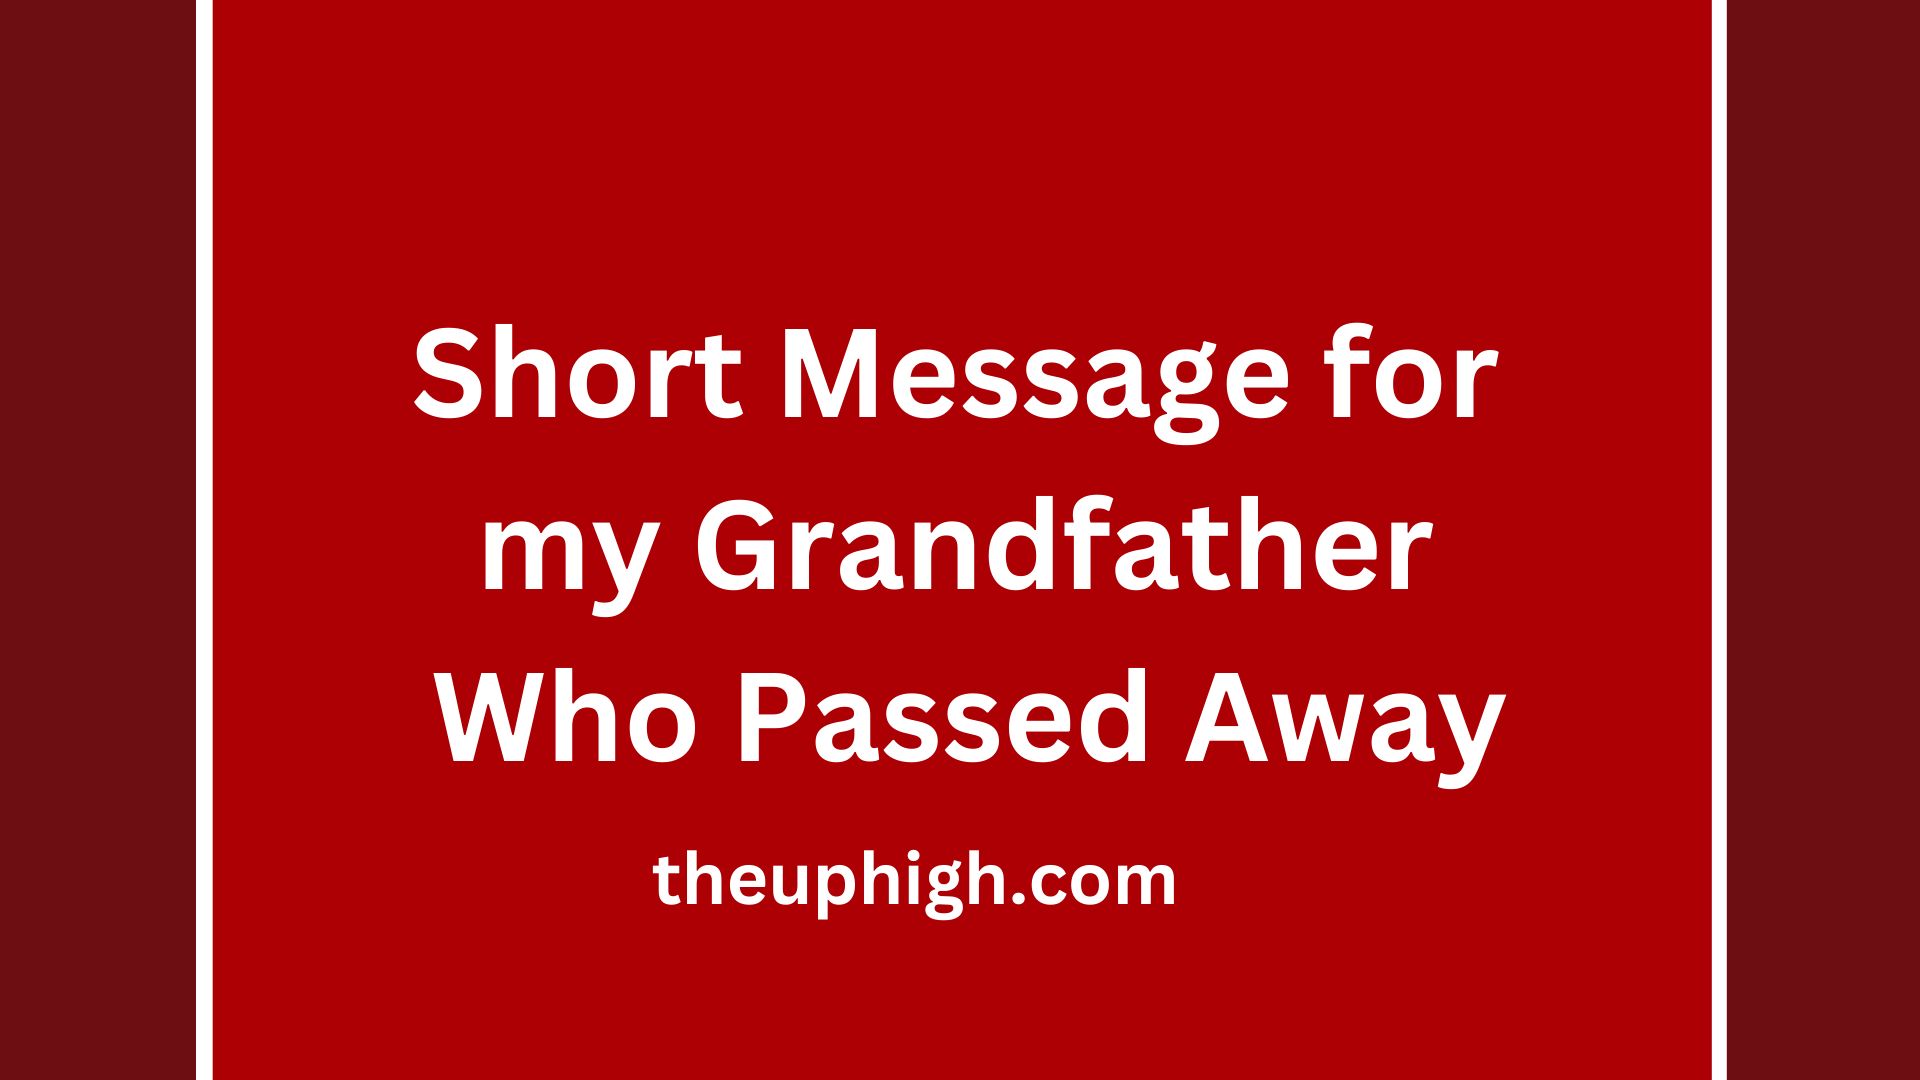 Short Message for my Grandfather Who Passed Away